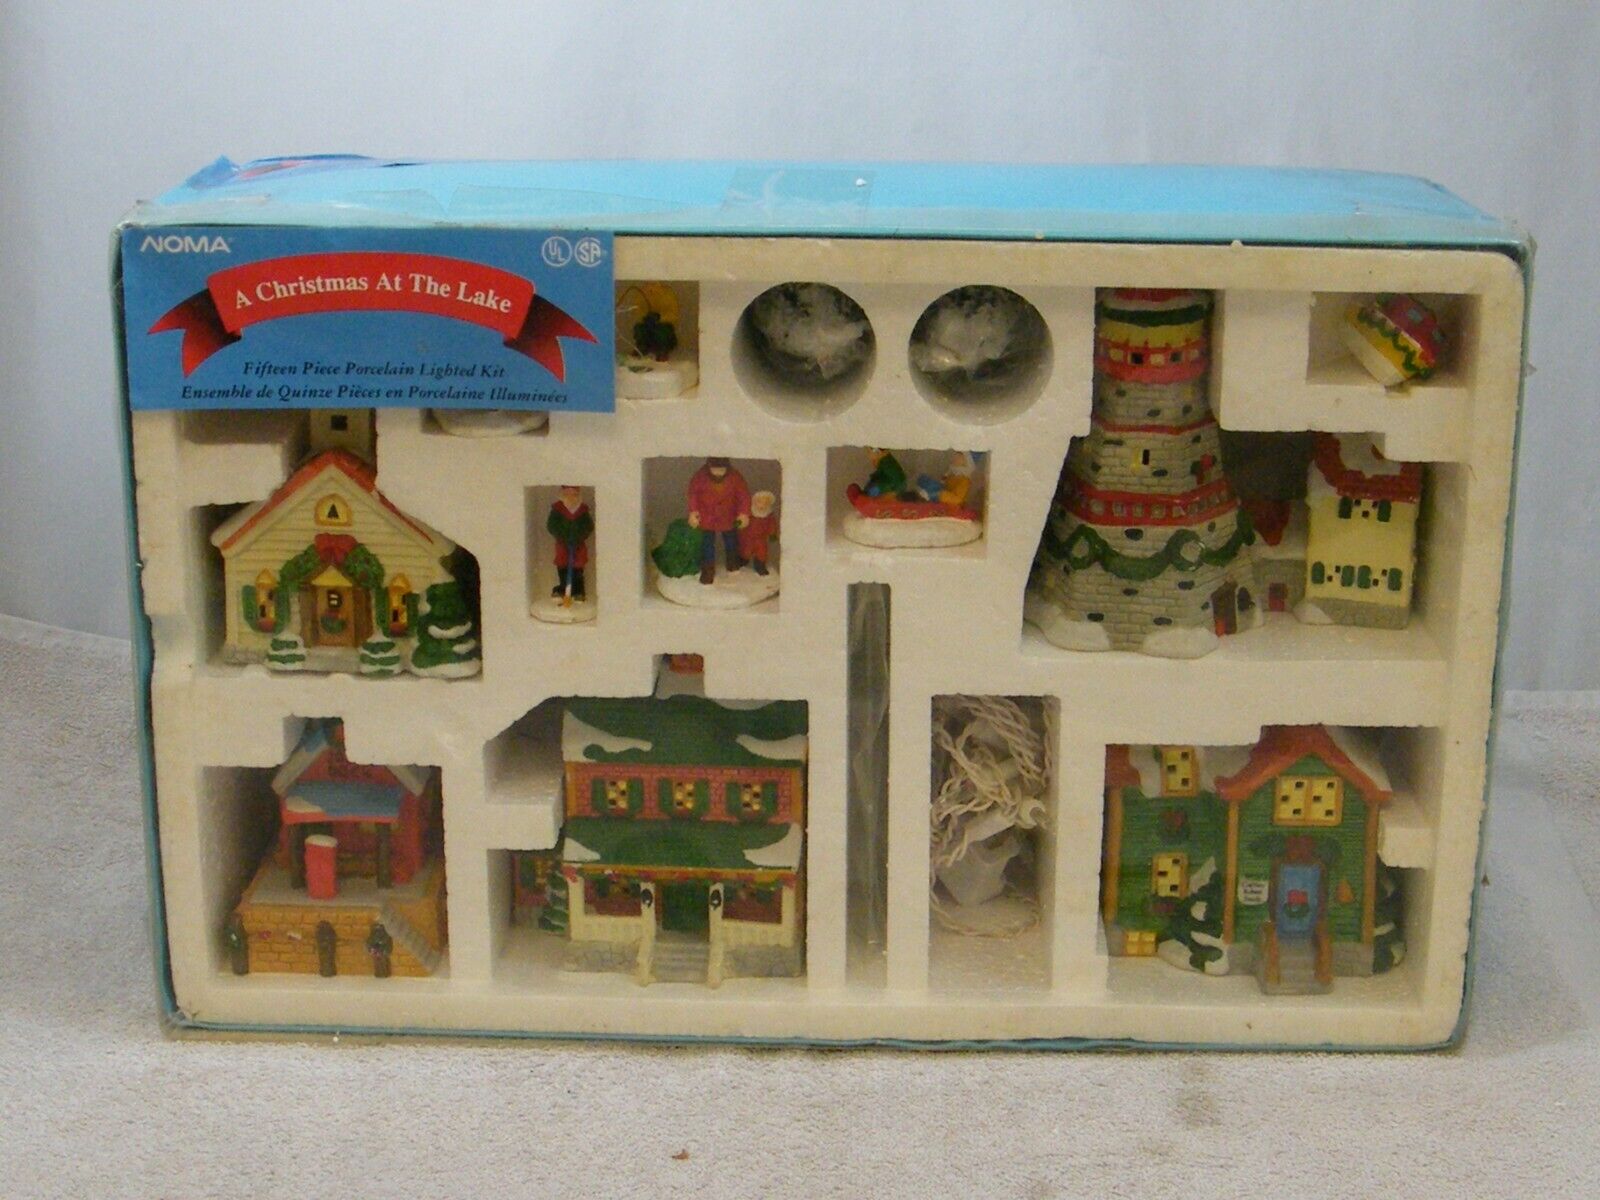 RARE NOMA; A CHRISTMAS AT THE LAKE, 15 PIECE PORCELAIN LIGHTED KIT, 28576